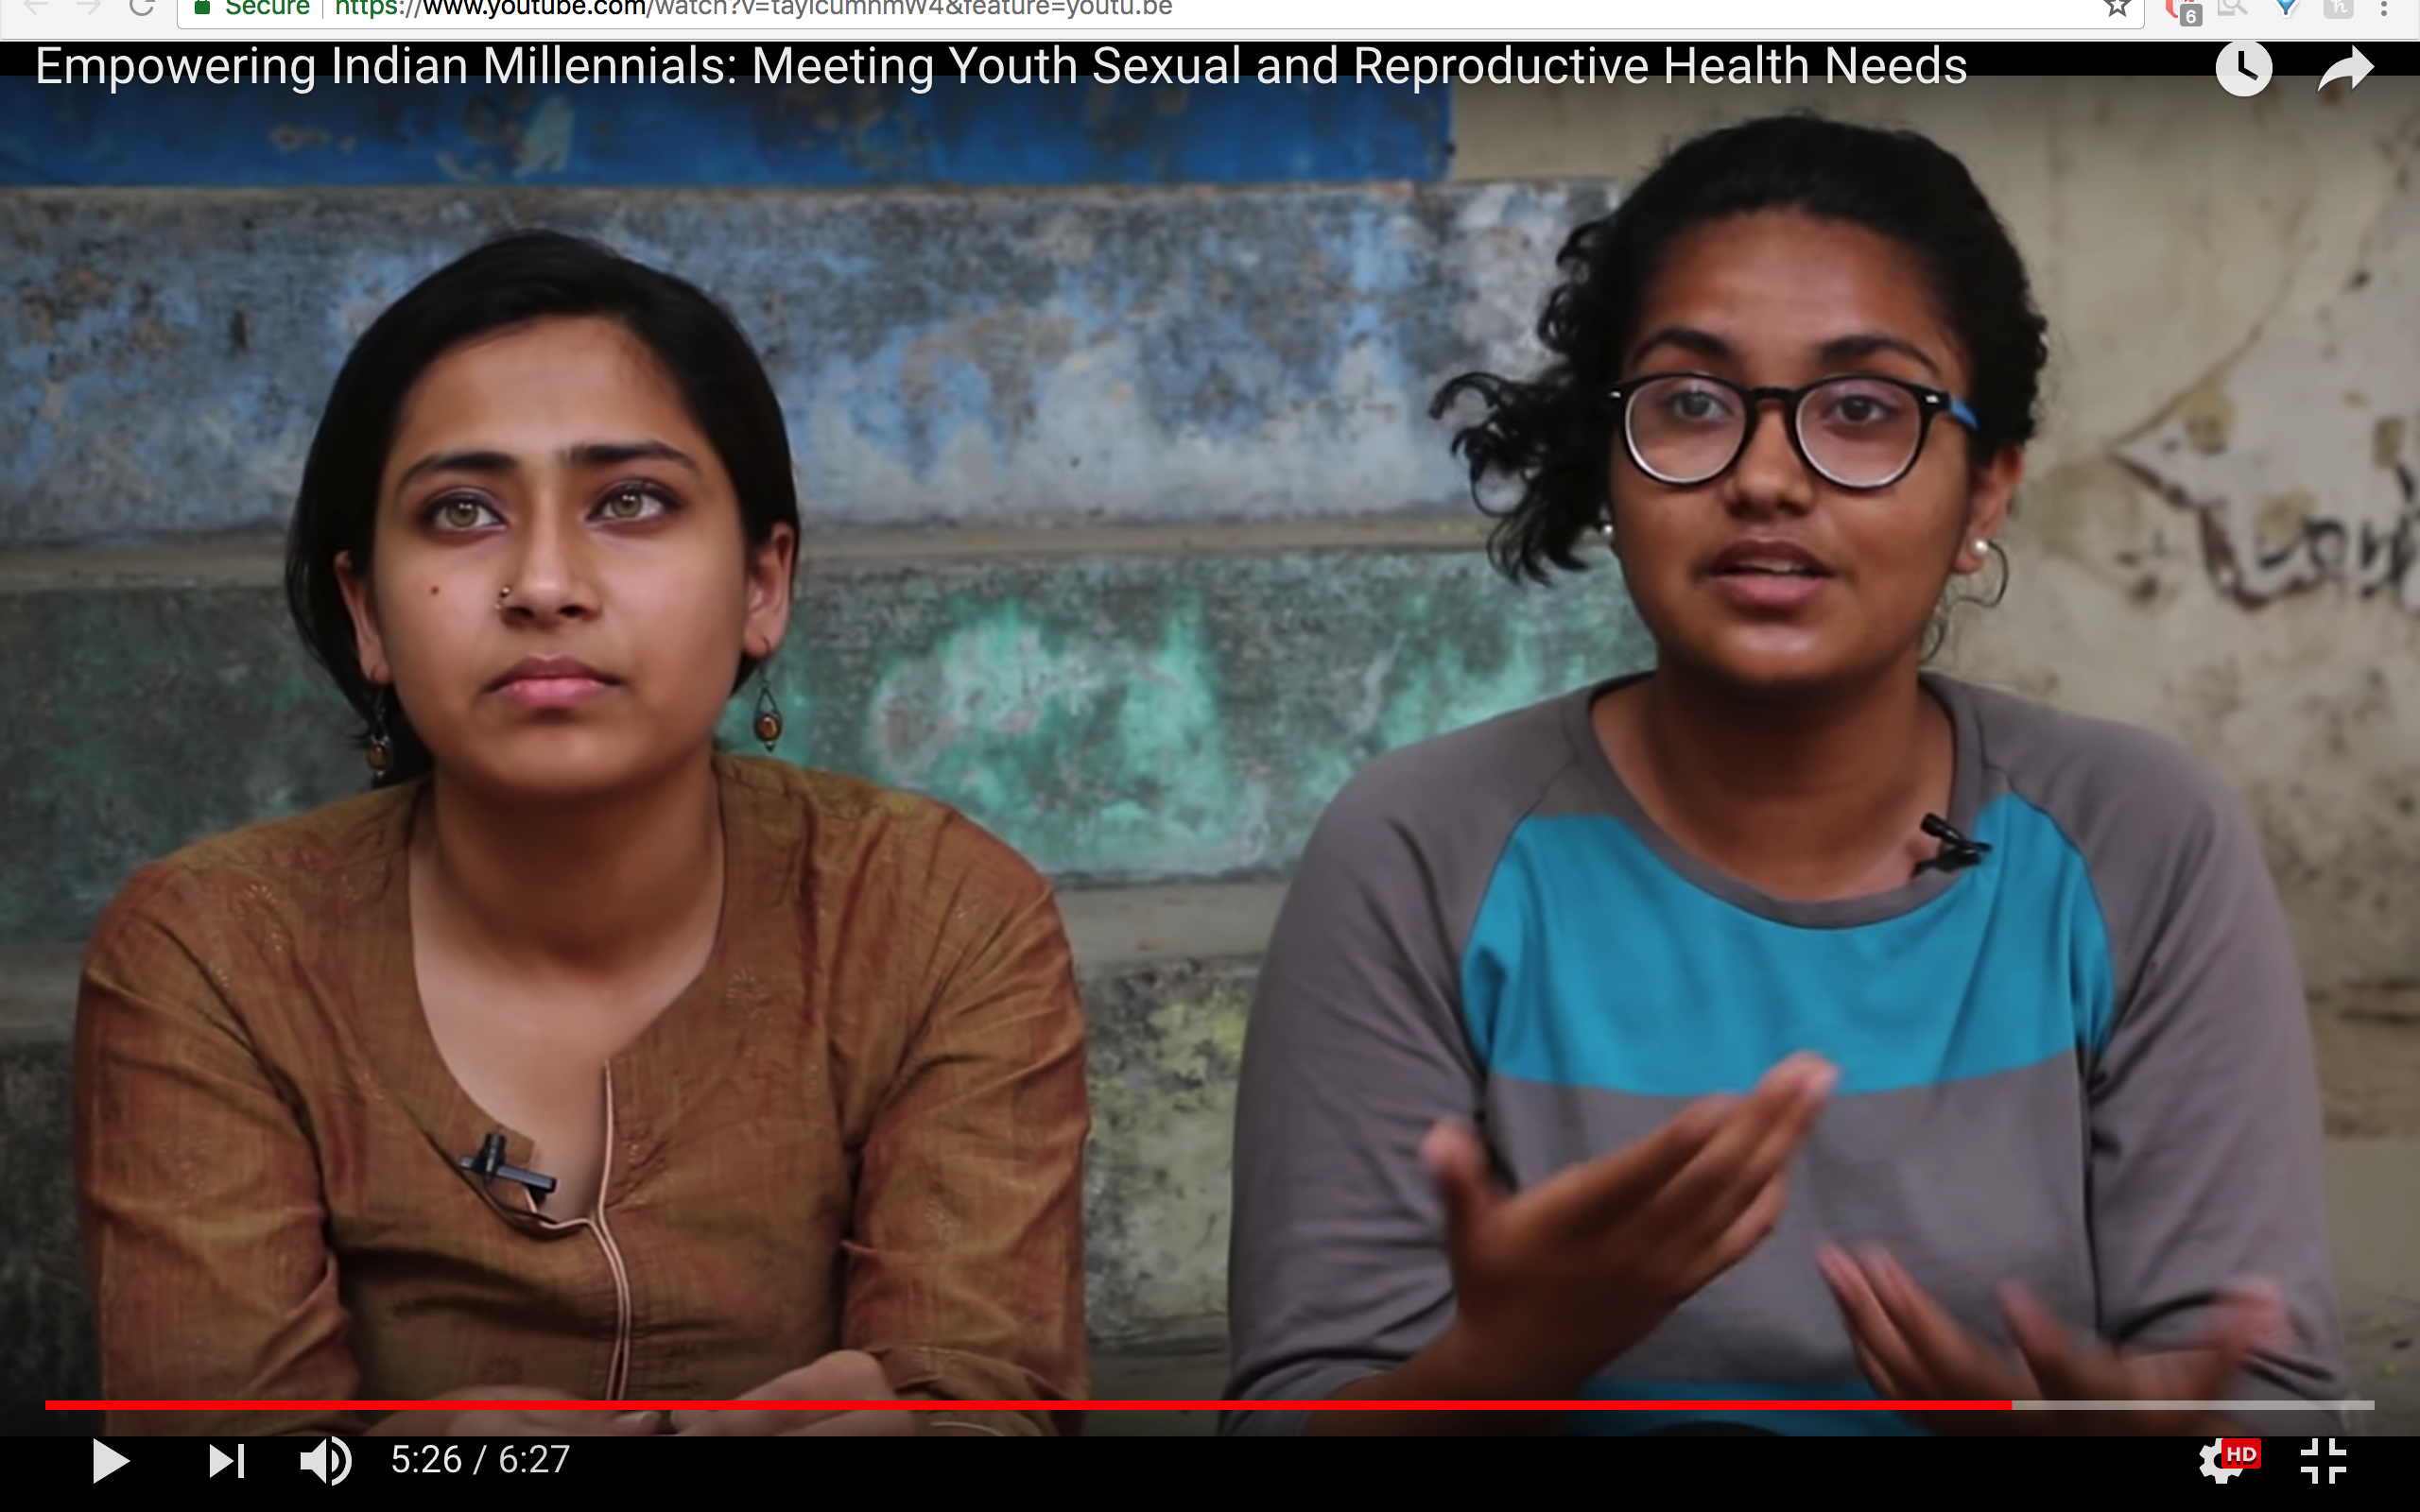 Young People in India Shine in New Advocacy Video and Factsheet